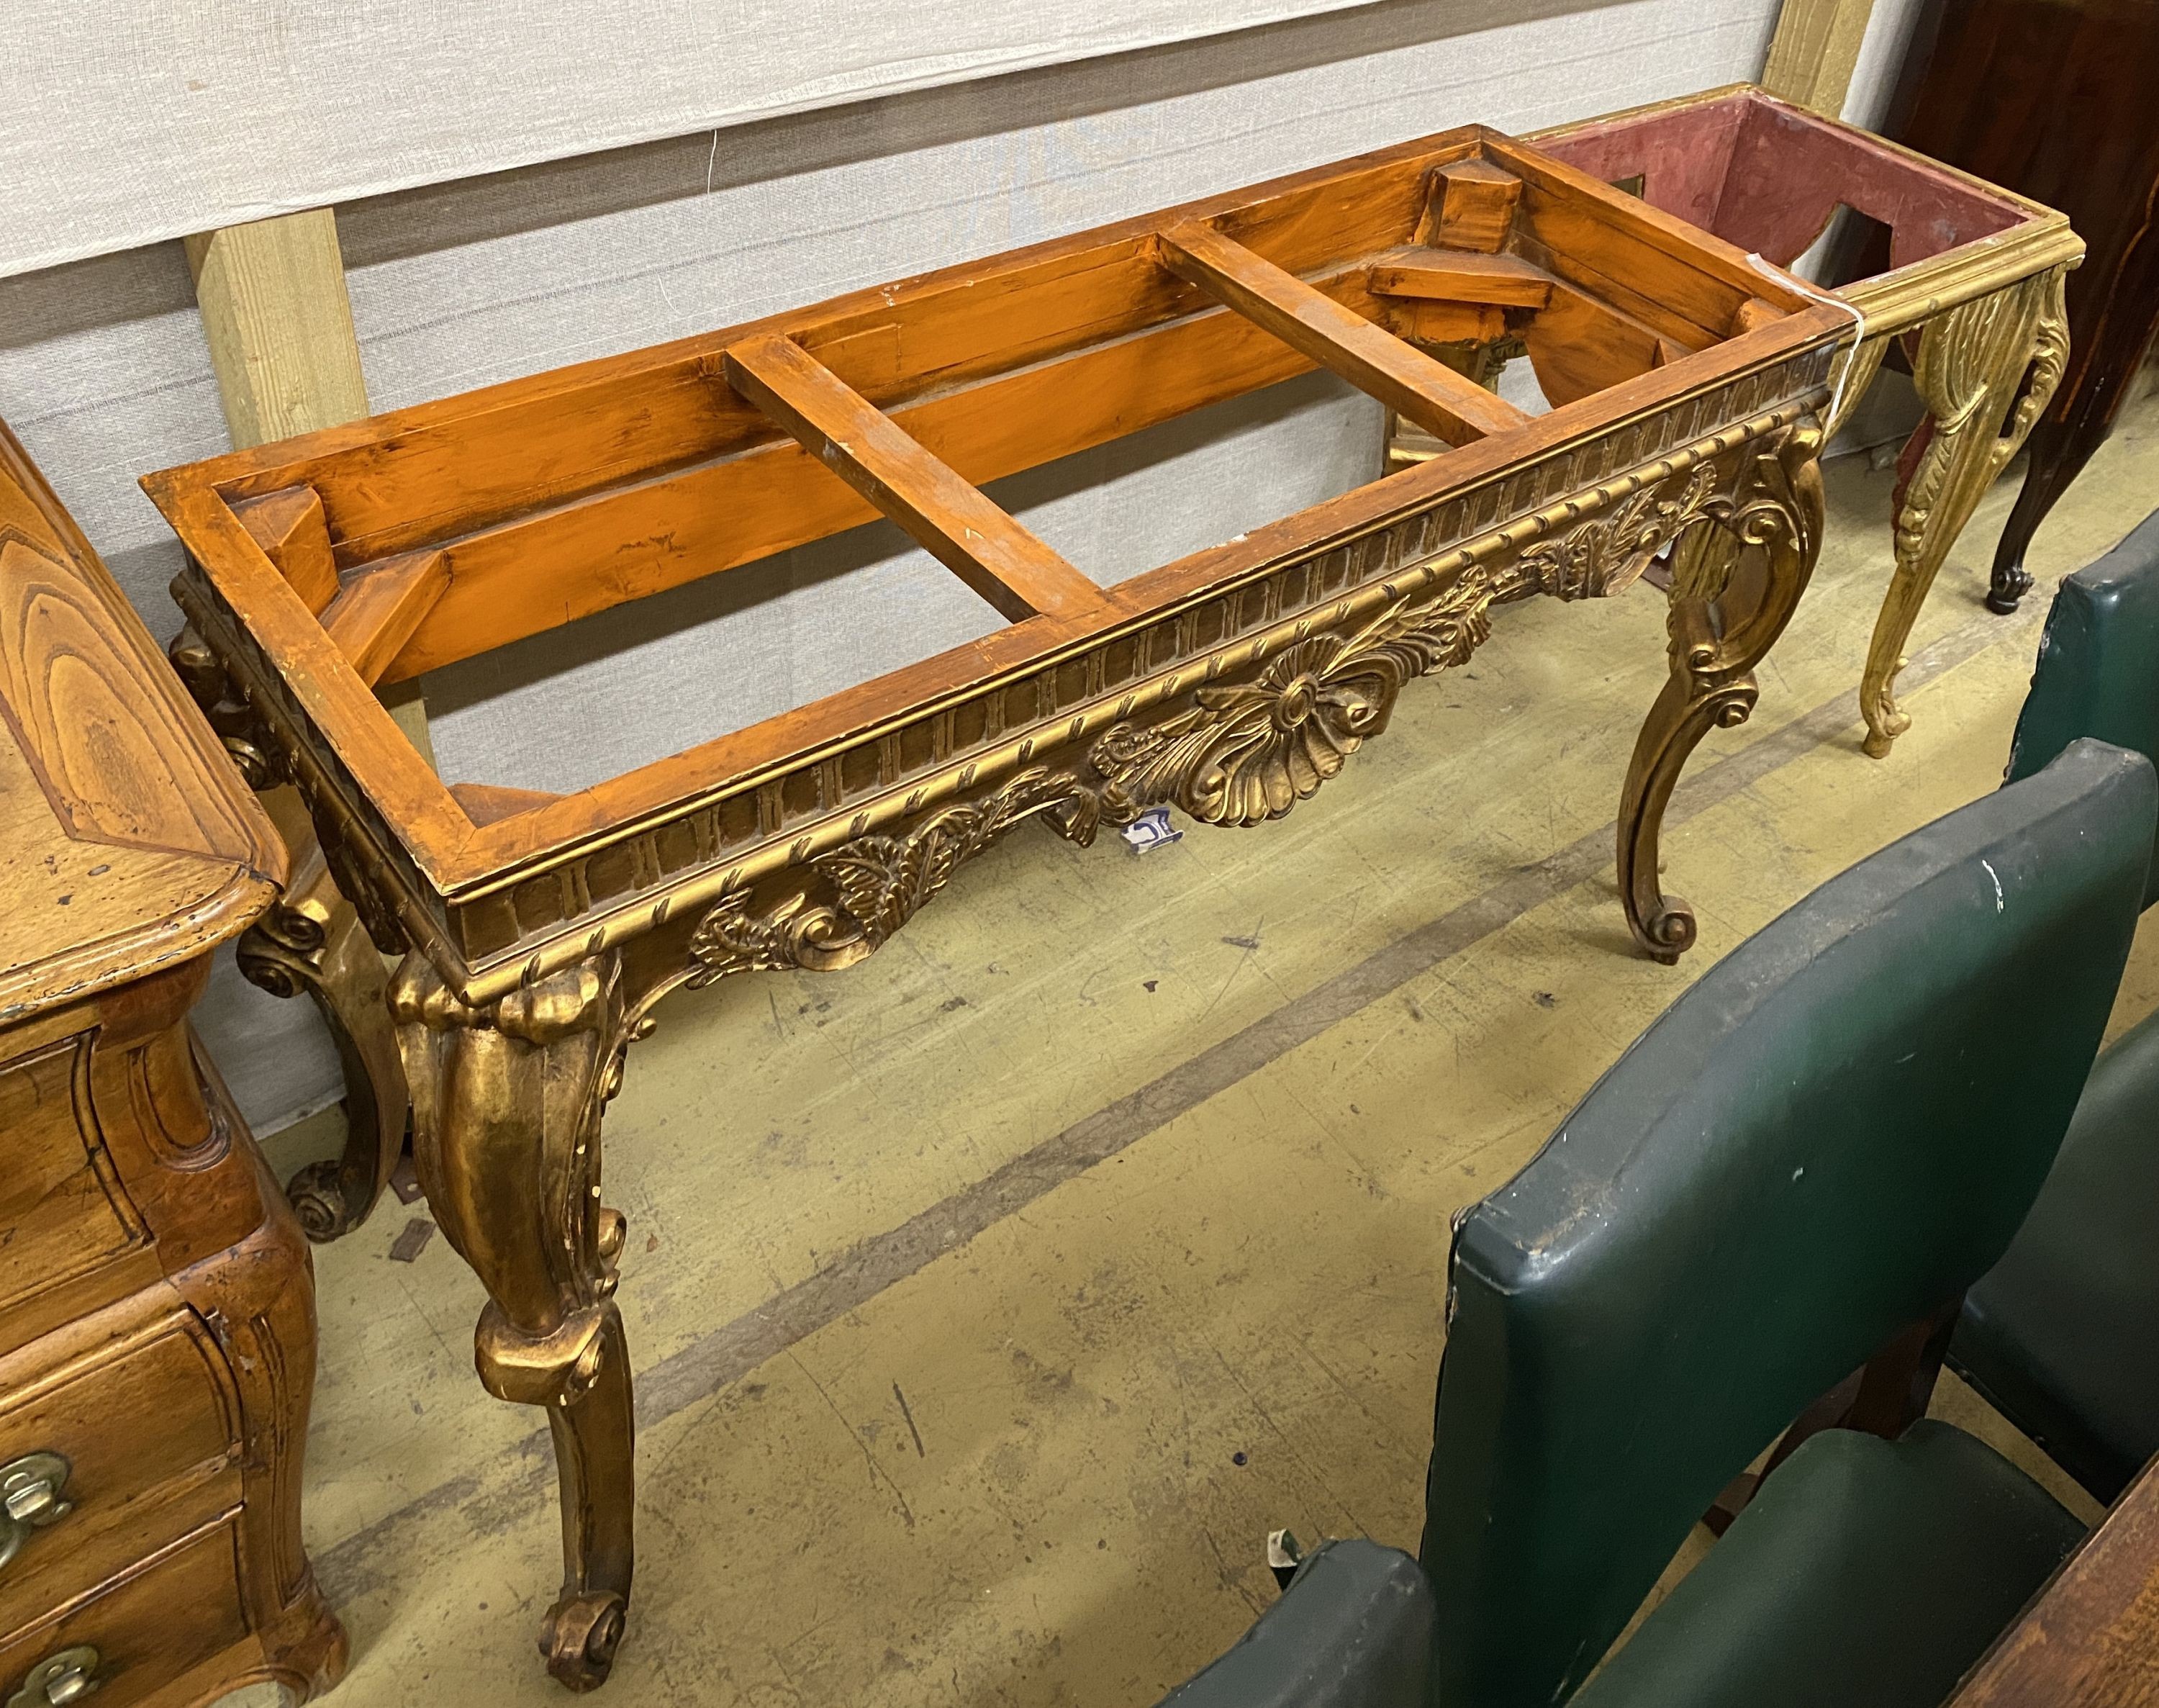 Two 18th century style giltwood table bases (lacking marble tops), larger width 127cm, depth 47cm, height 79cm